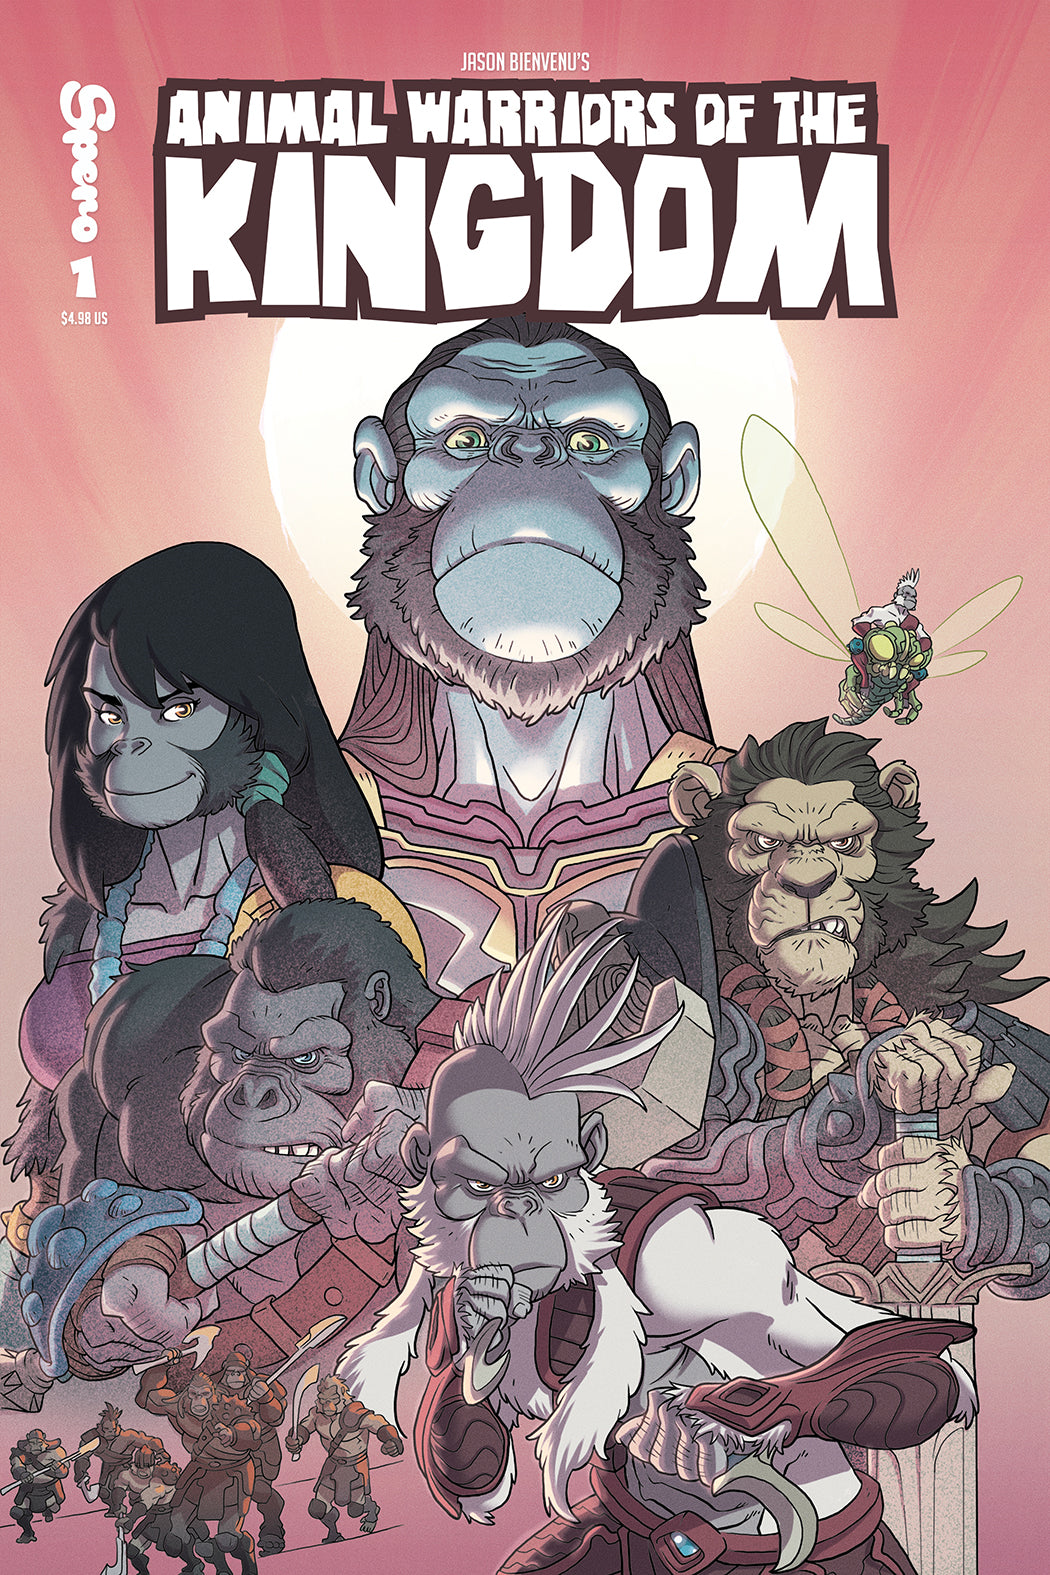 ANIMAL WARRIORS OF THE KINGDOM ISSUE #1 -Physical Copy